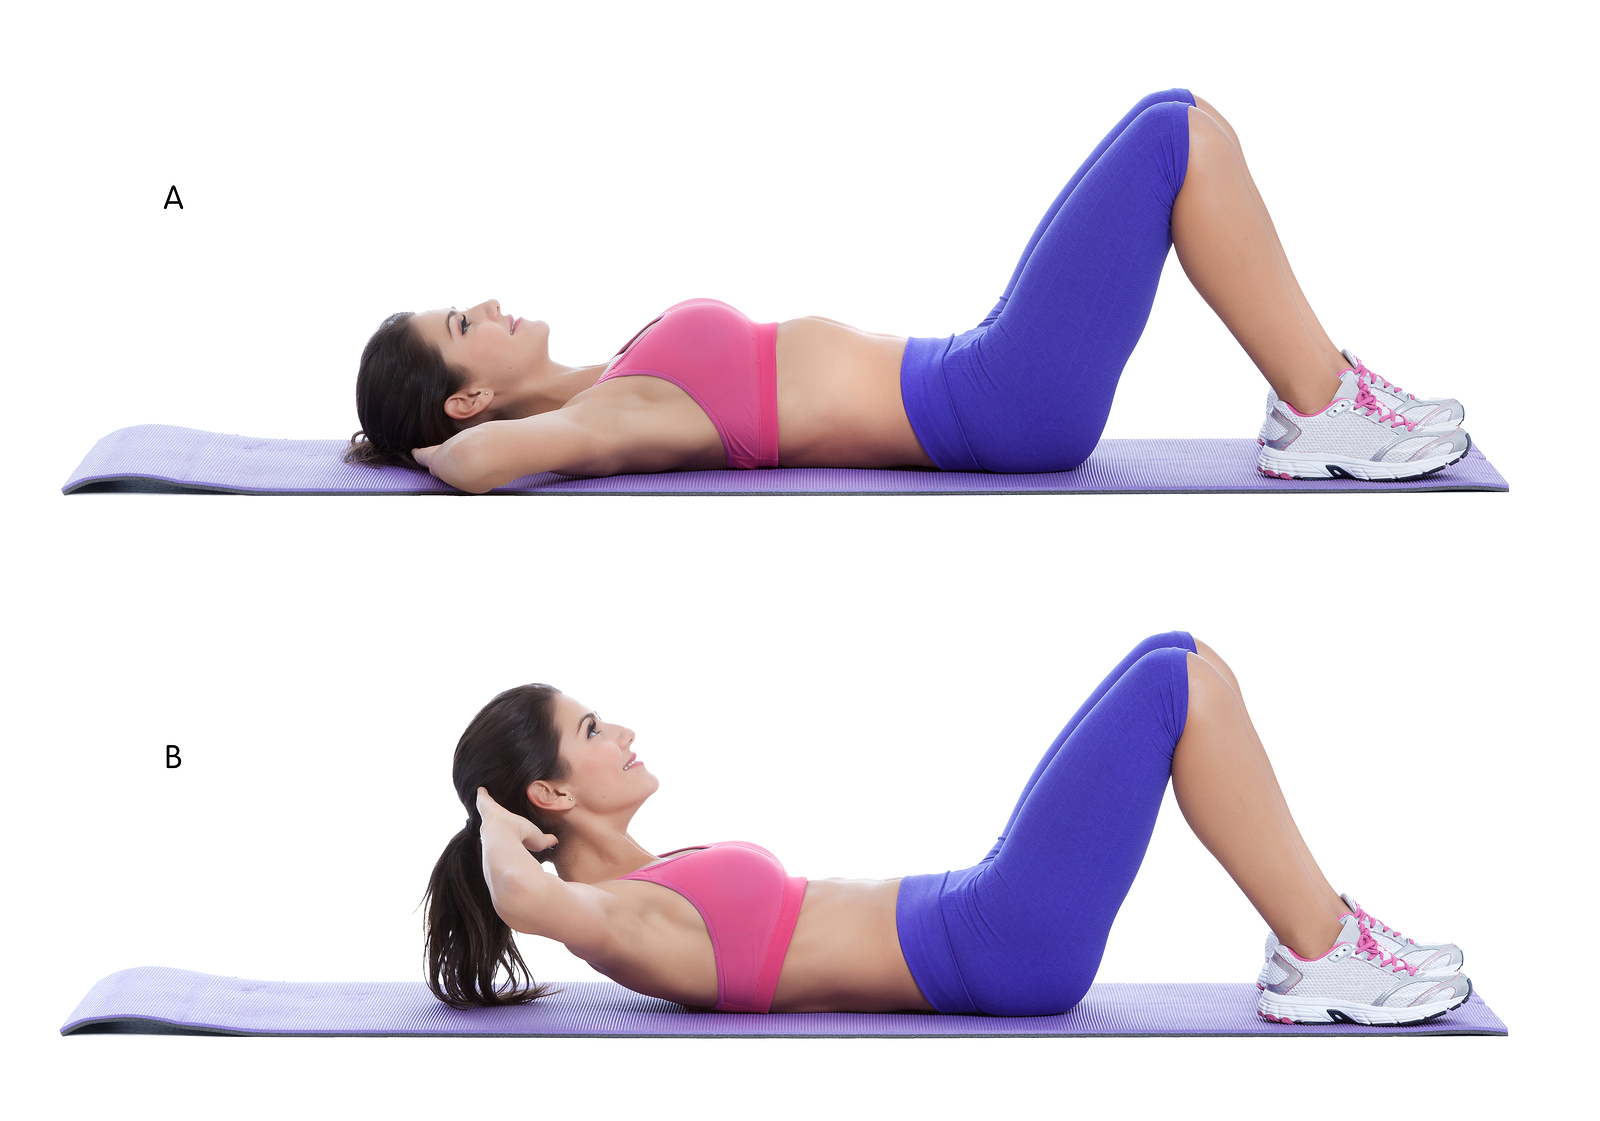 Step by step instructions for abs. Lie flat on your back and place your hands behind your head. Bend your knees and firmly plant your feet on the floor.